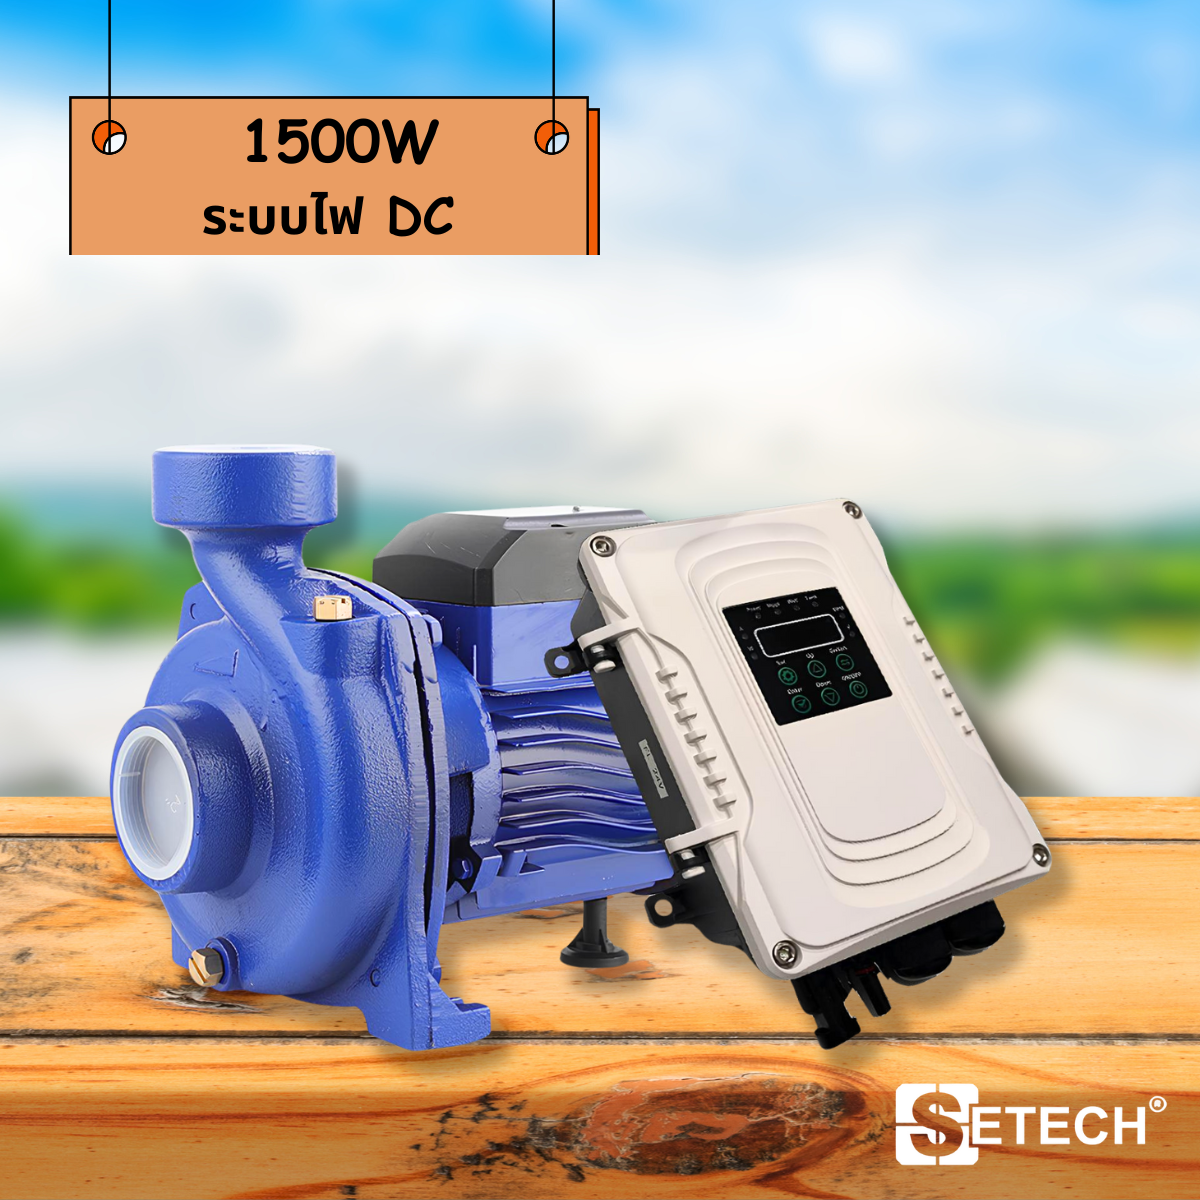 Centrifugal pump for solar cells and DC power systems + Control, 3 inch pipe (1500W) SETECH